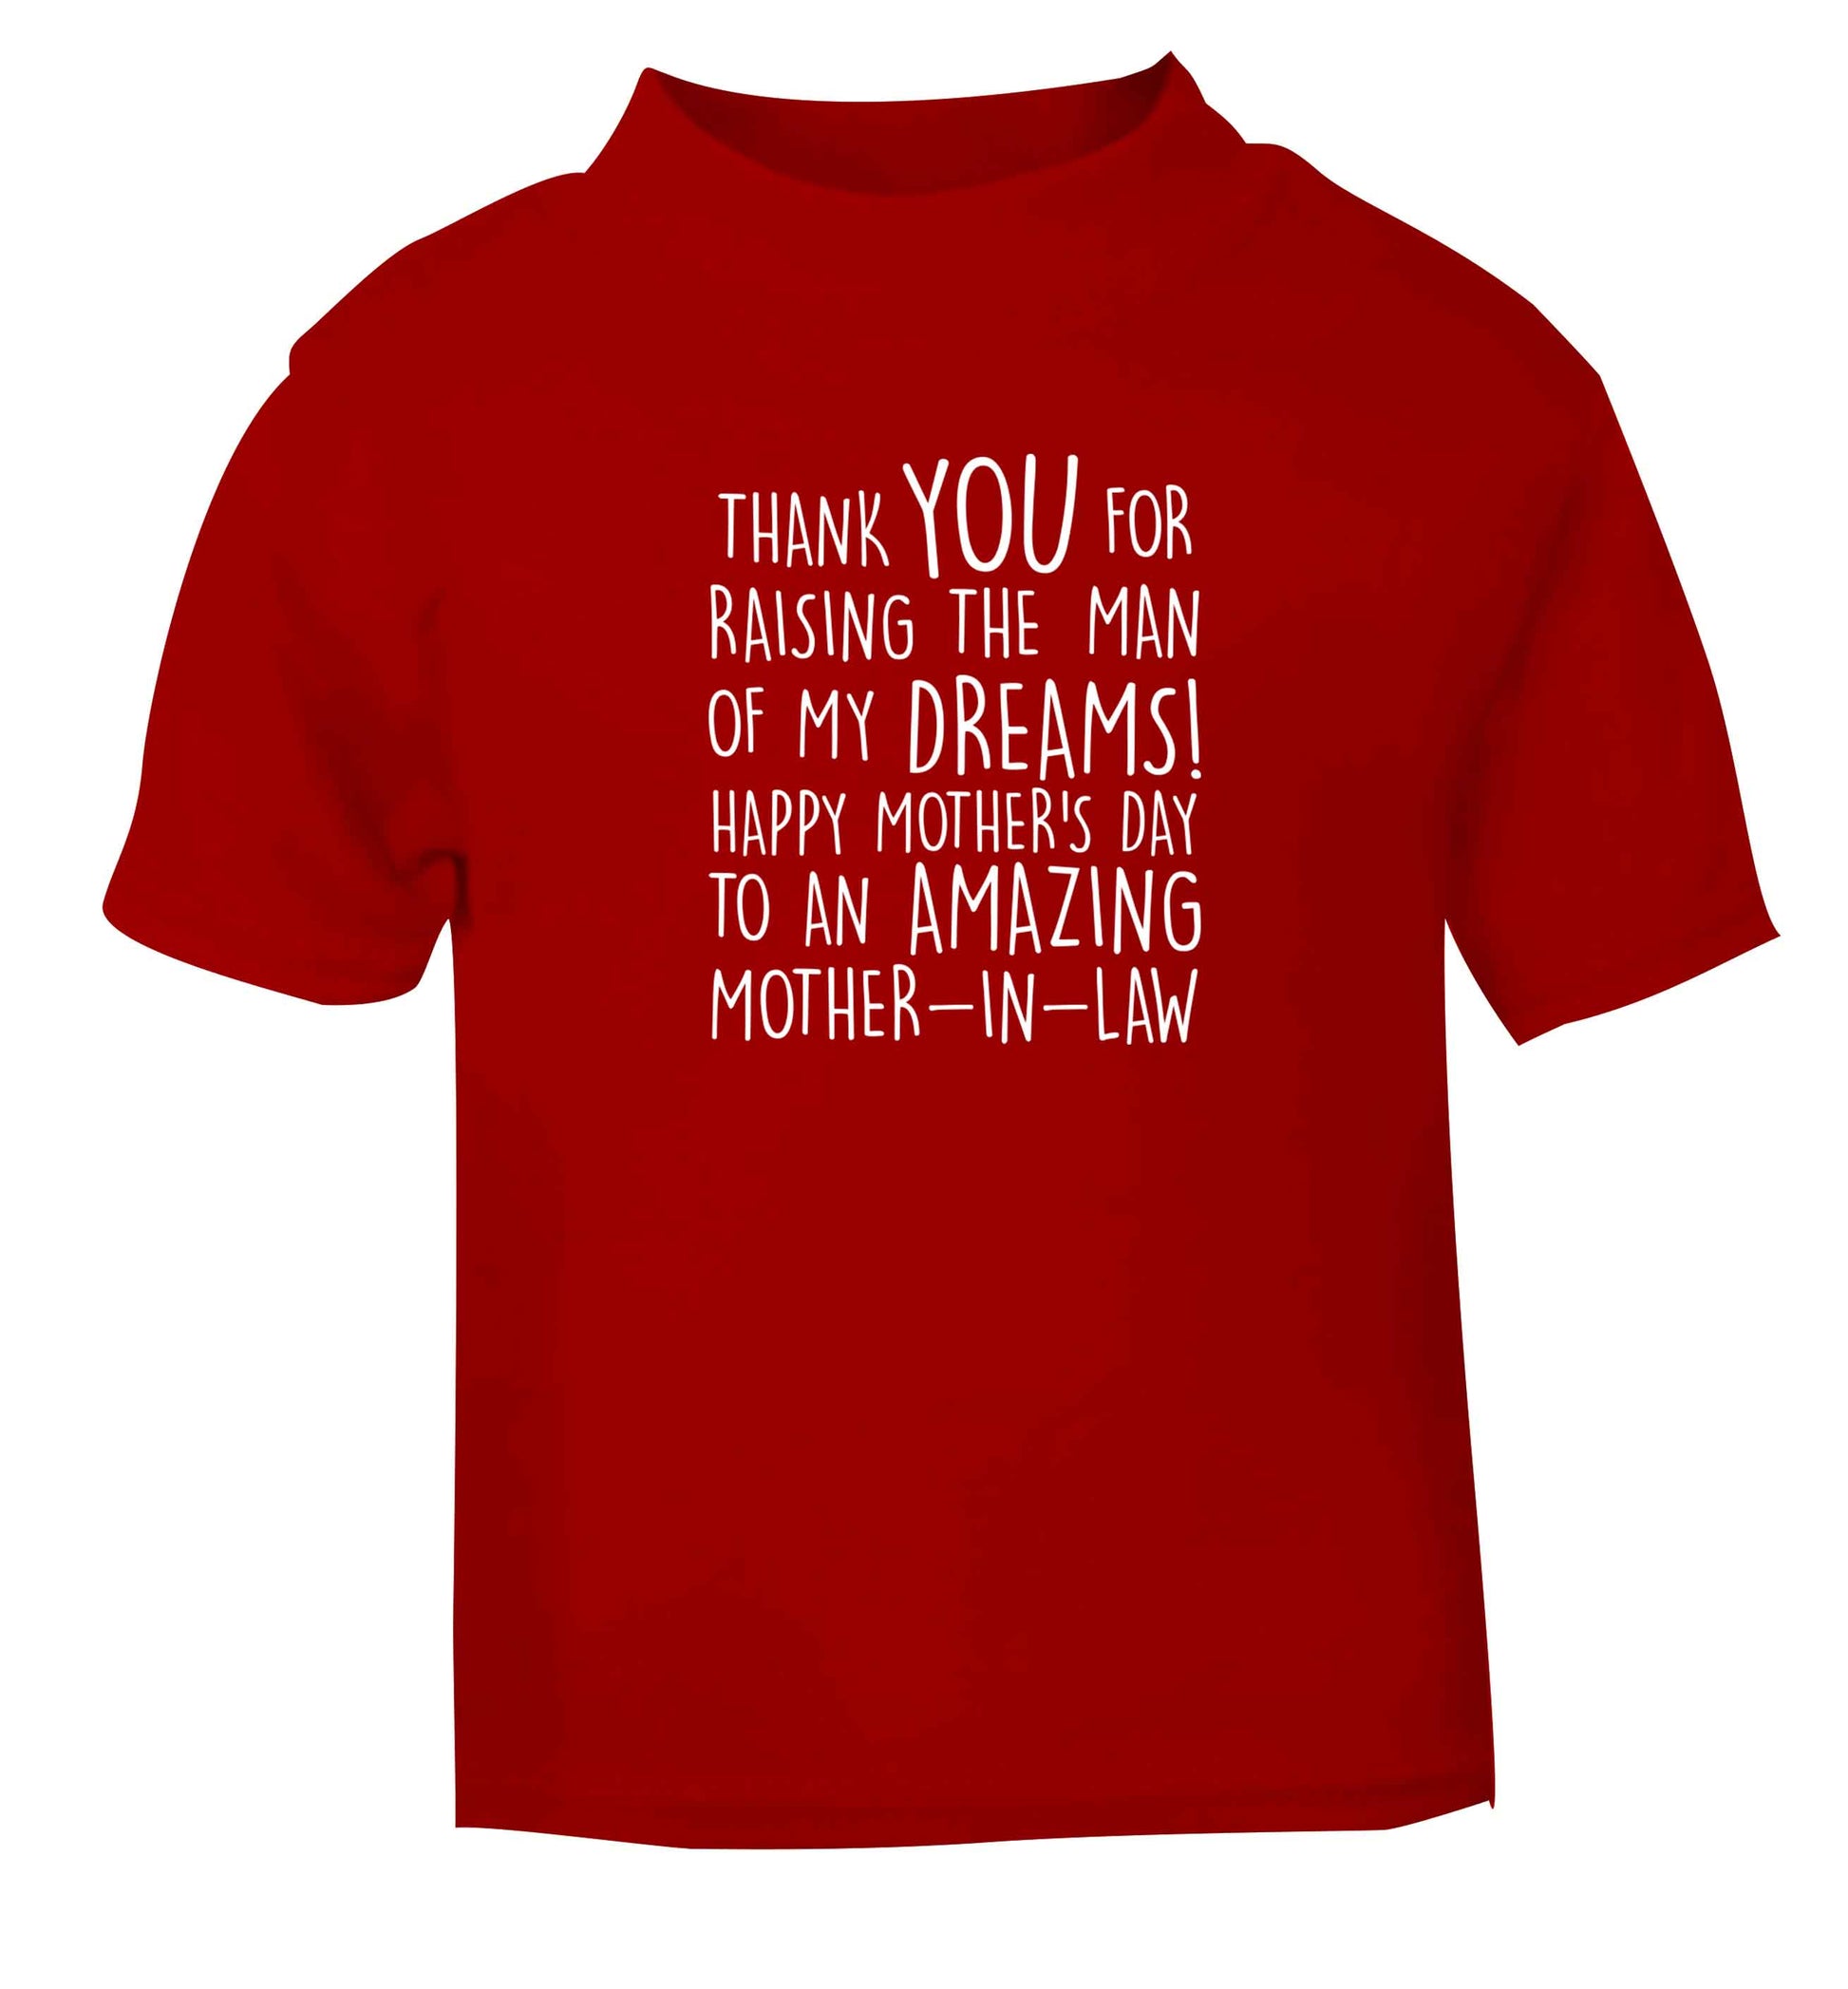 Raising the man of my dreams mother's day mother-in-law red baby toddler Tshirt 2 Years